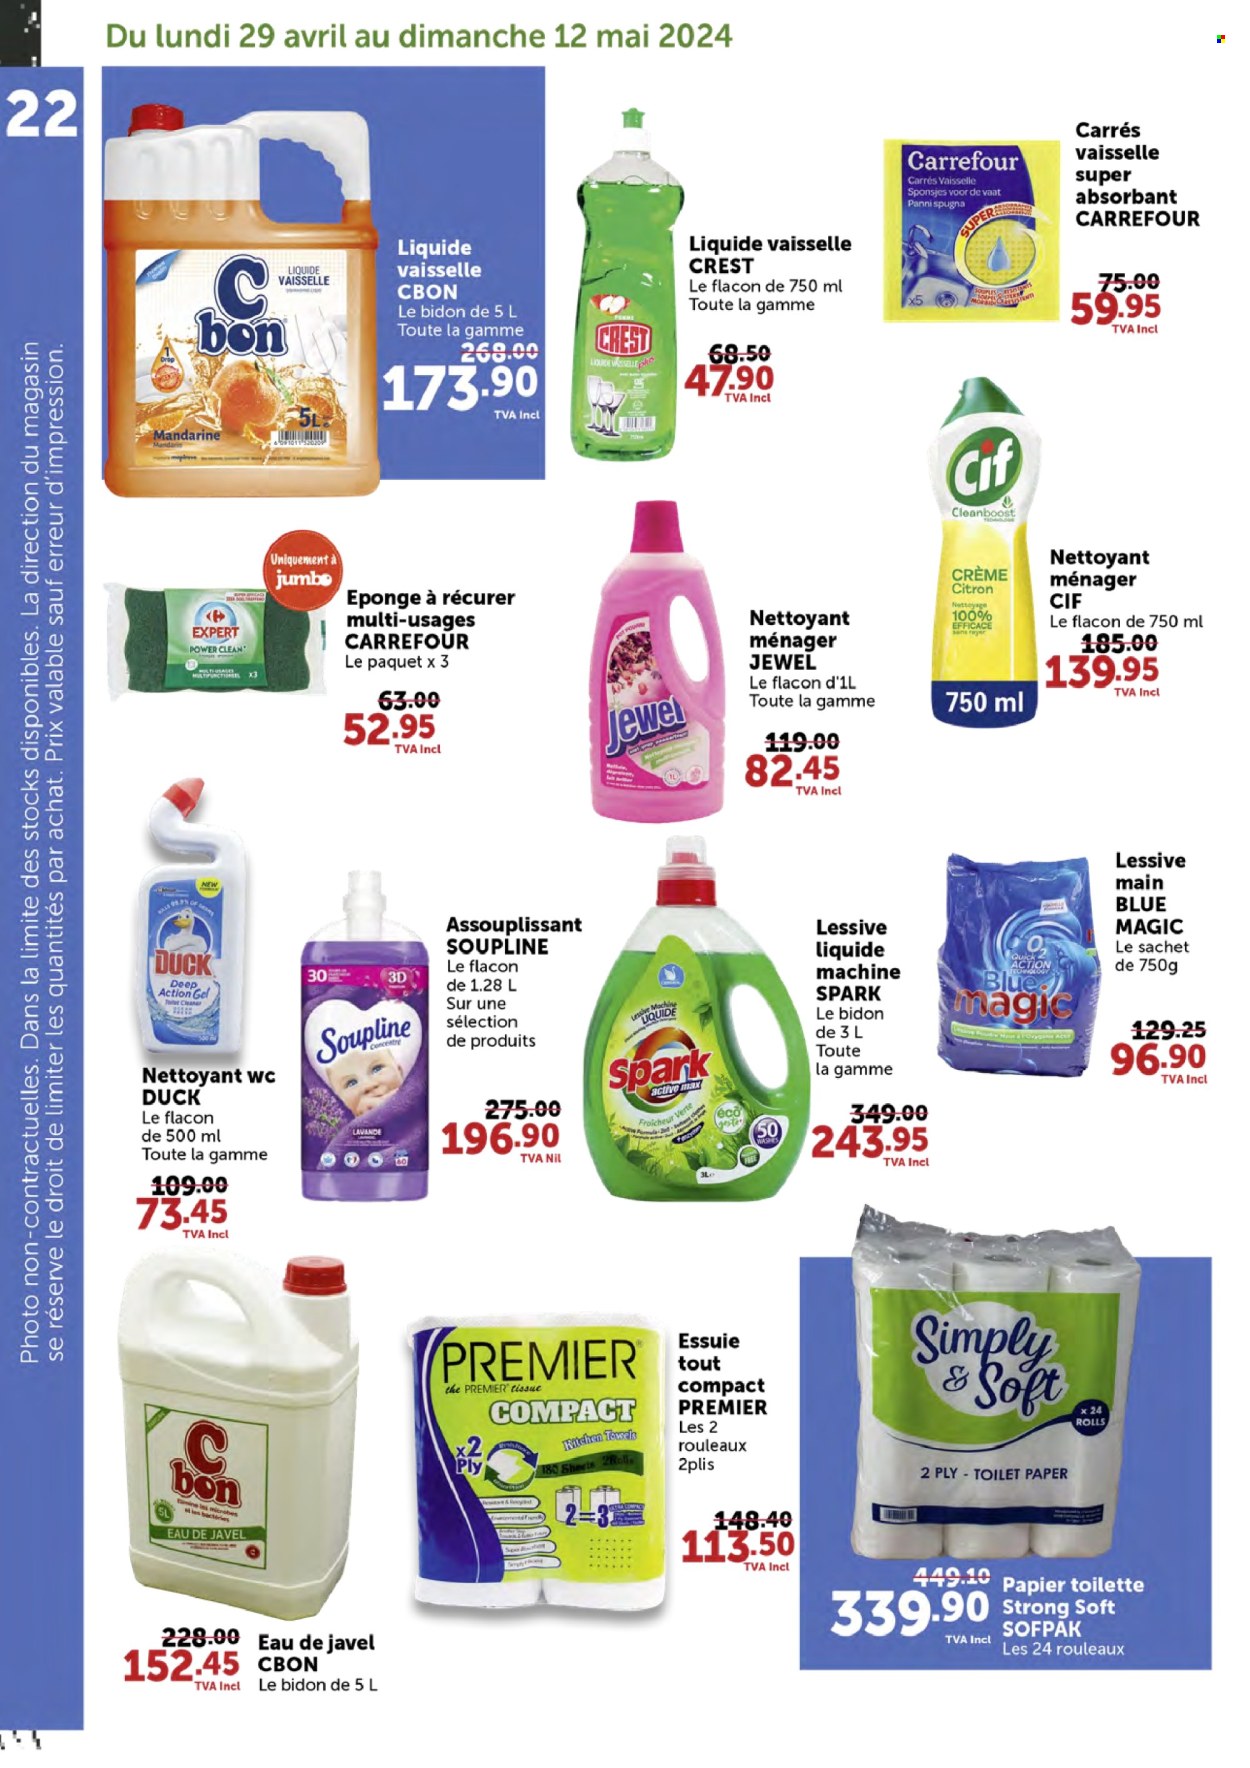 thumbnail - Jumbo Catalogue - 29.04.2024 - 12.05.2024 - Sales products - poultry meat, toilet paper, tissues, kitchen towels, cleaner, toilet cleaner, Cif, Crest, pot. Page 22.